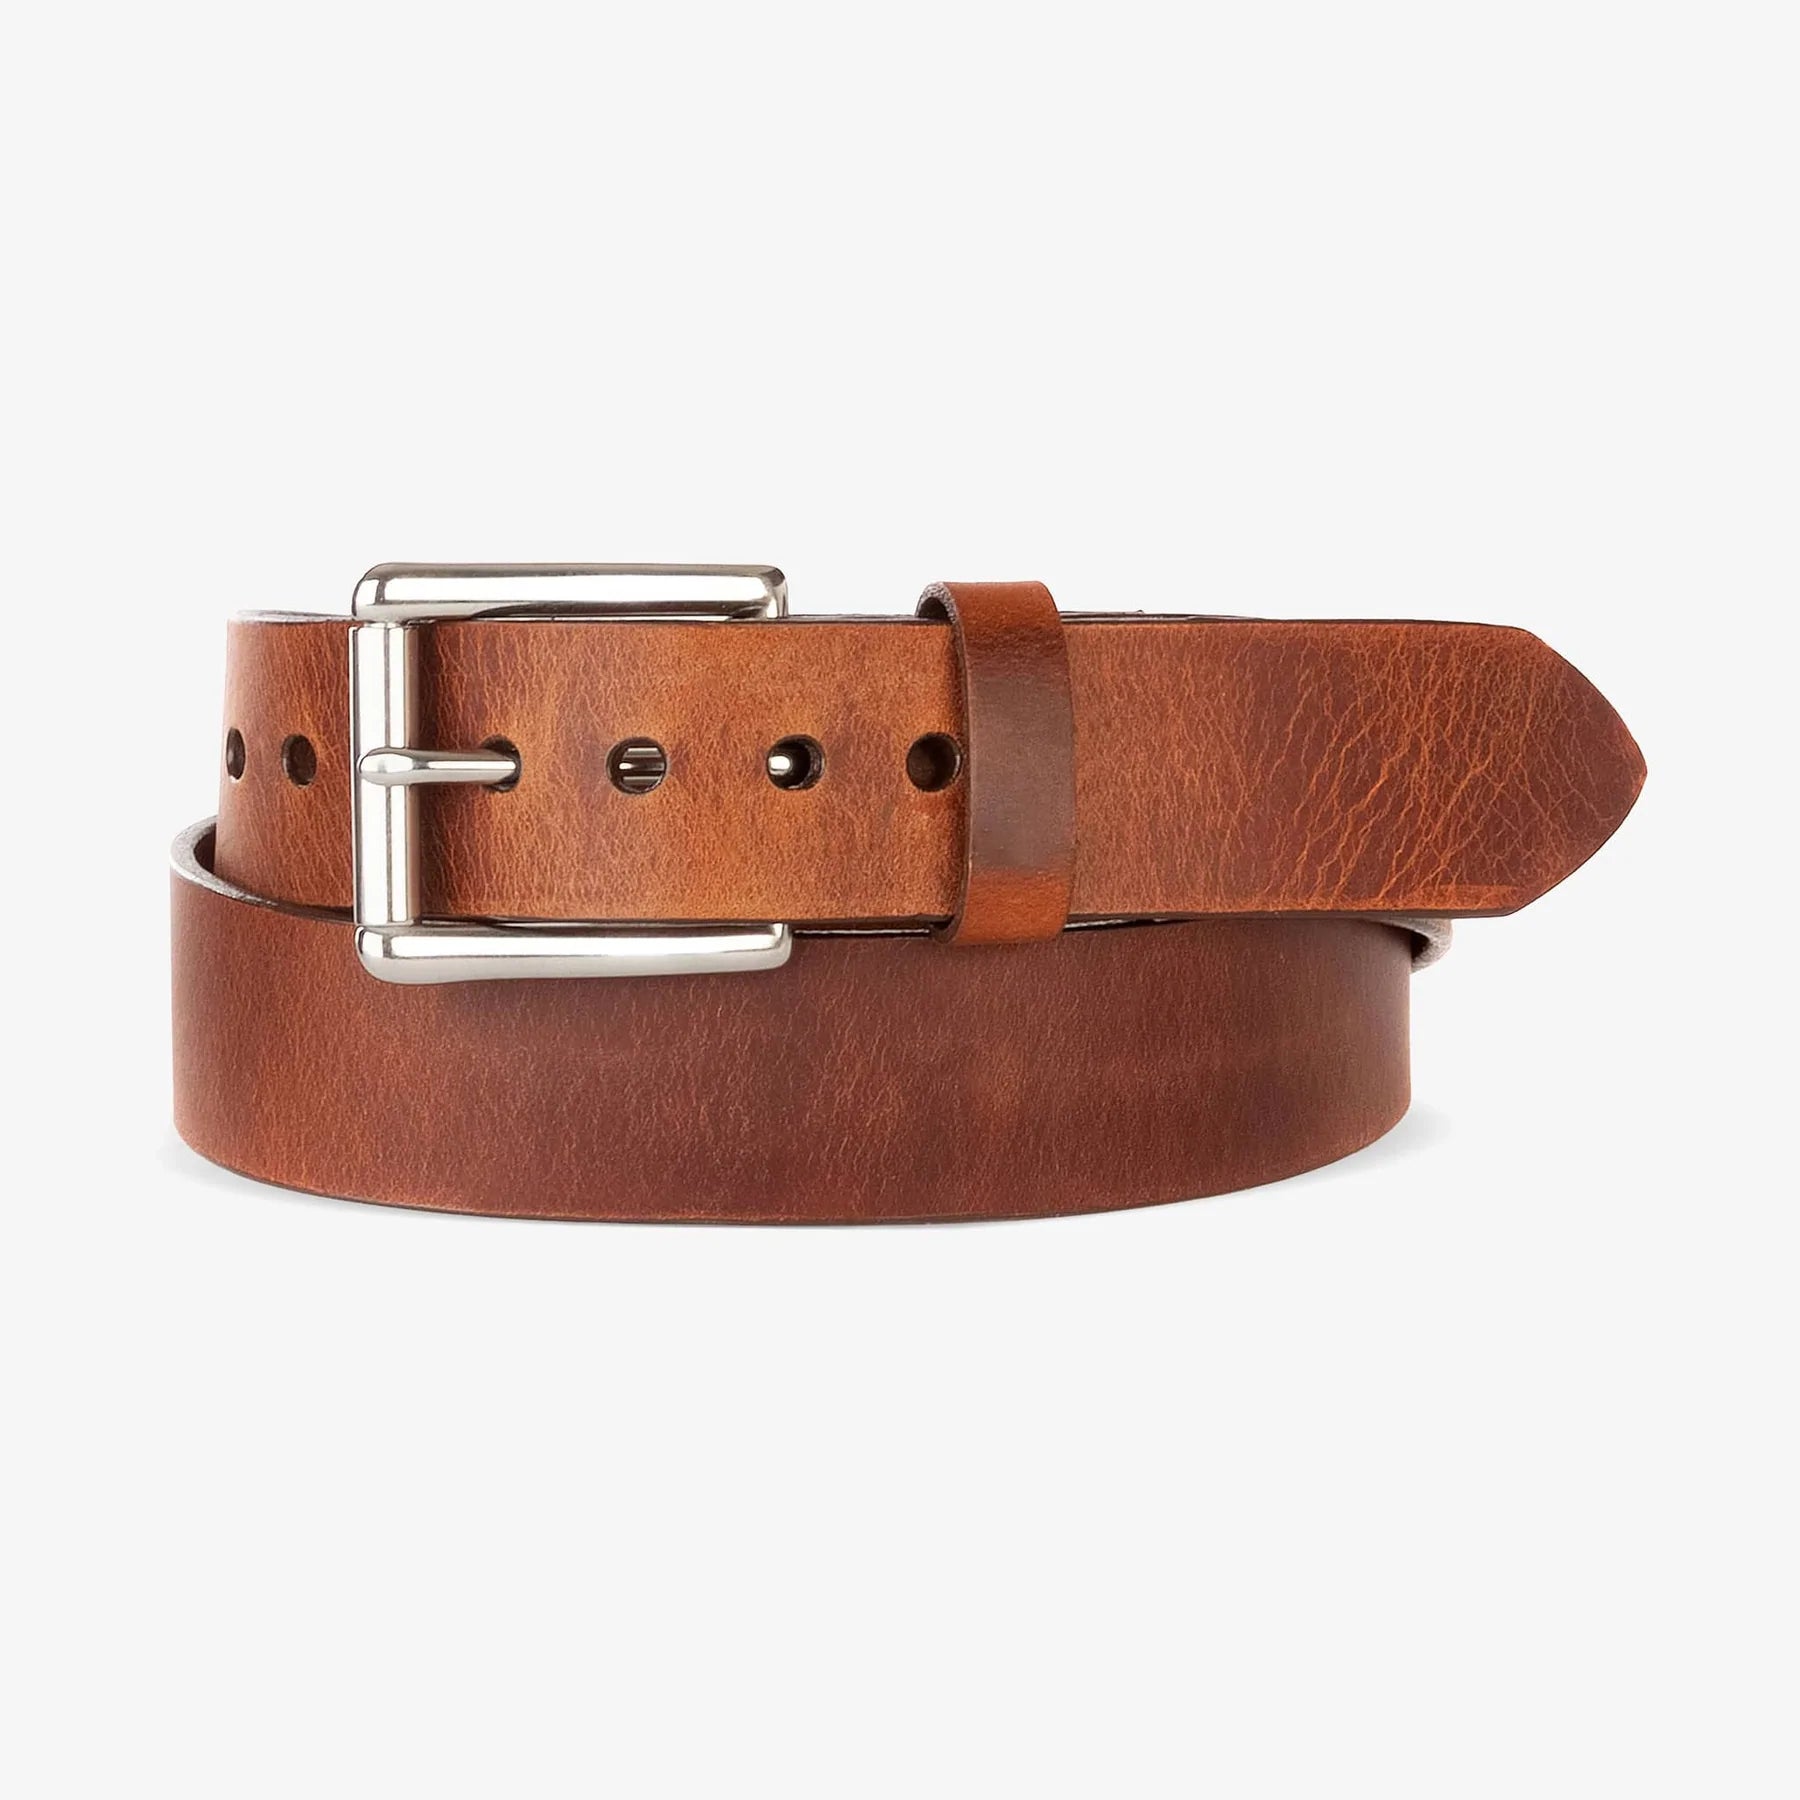 Brave Classic belt in Brandy with silver buckle